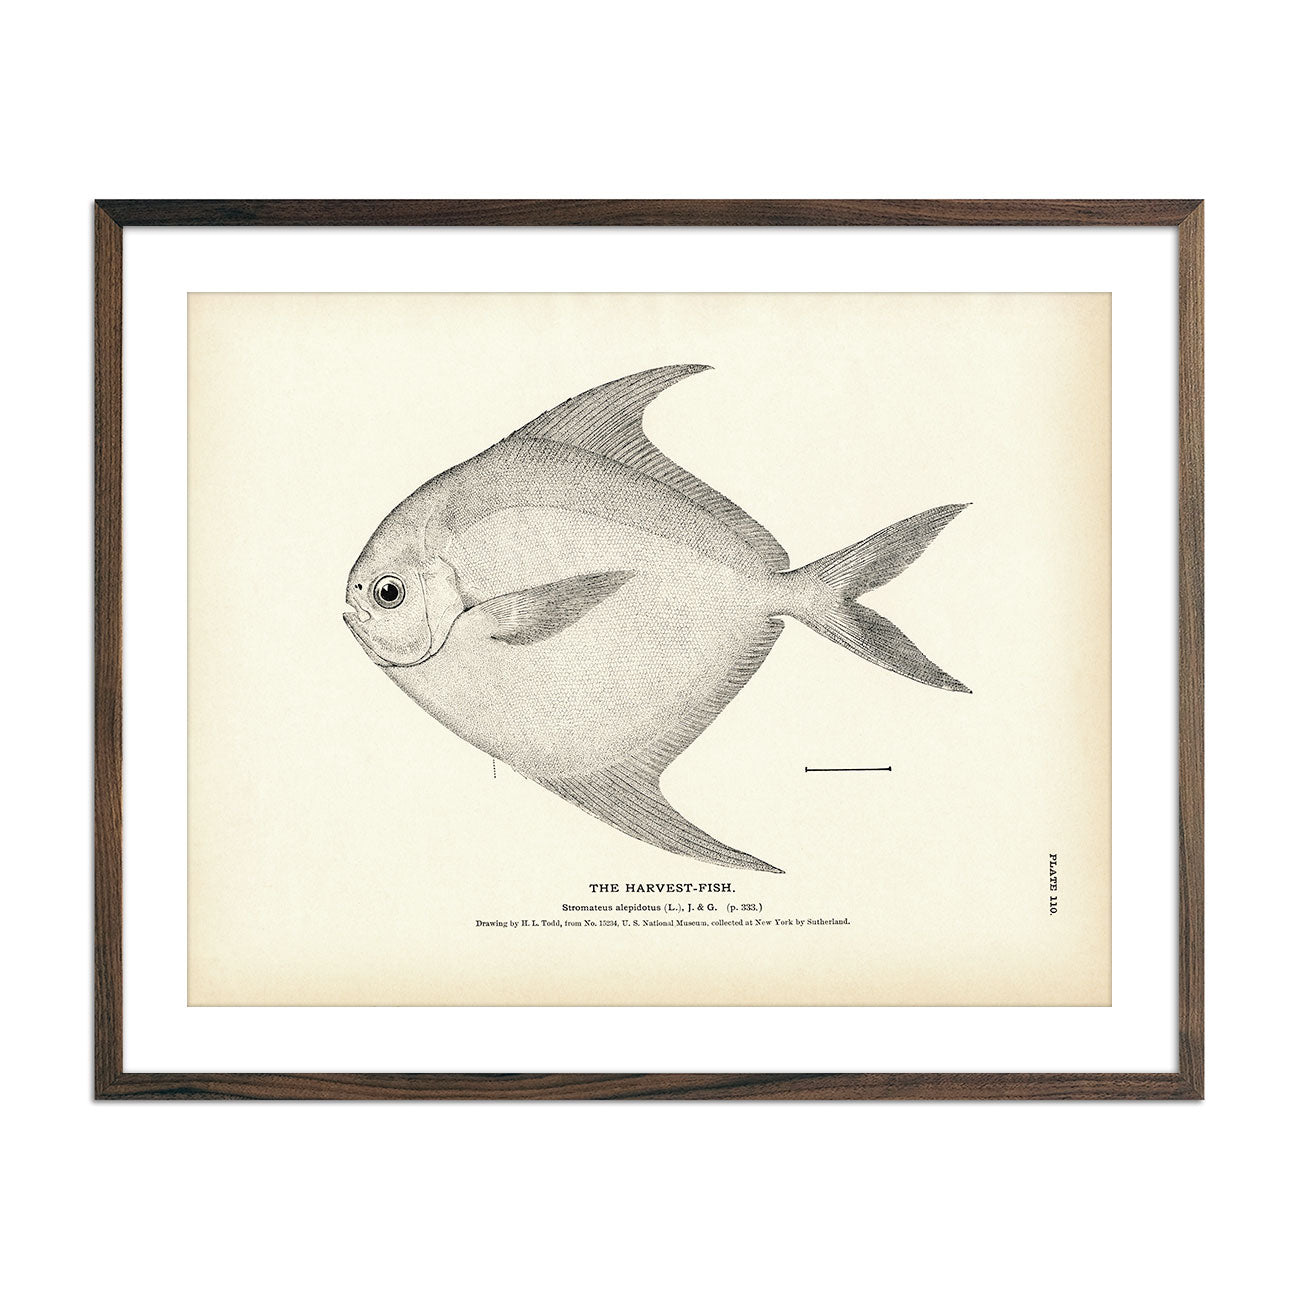 Flying Fish - Framed Quill & Ink Fine Art Print 11x14 (100 Editions) -  Studio Abachar